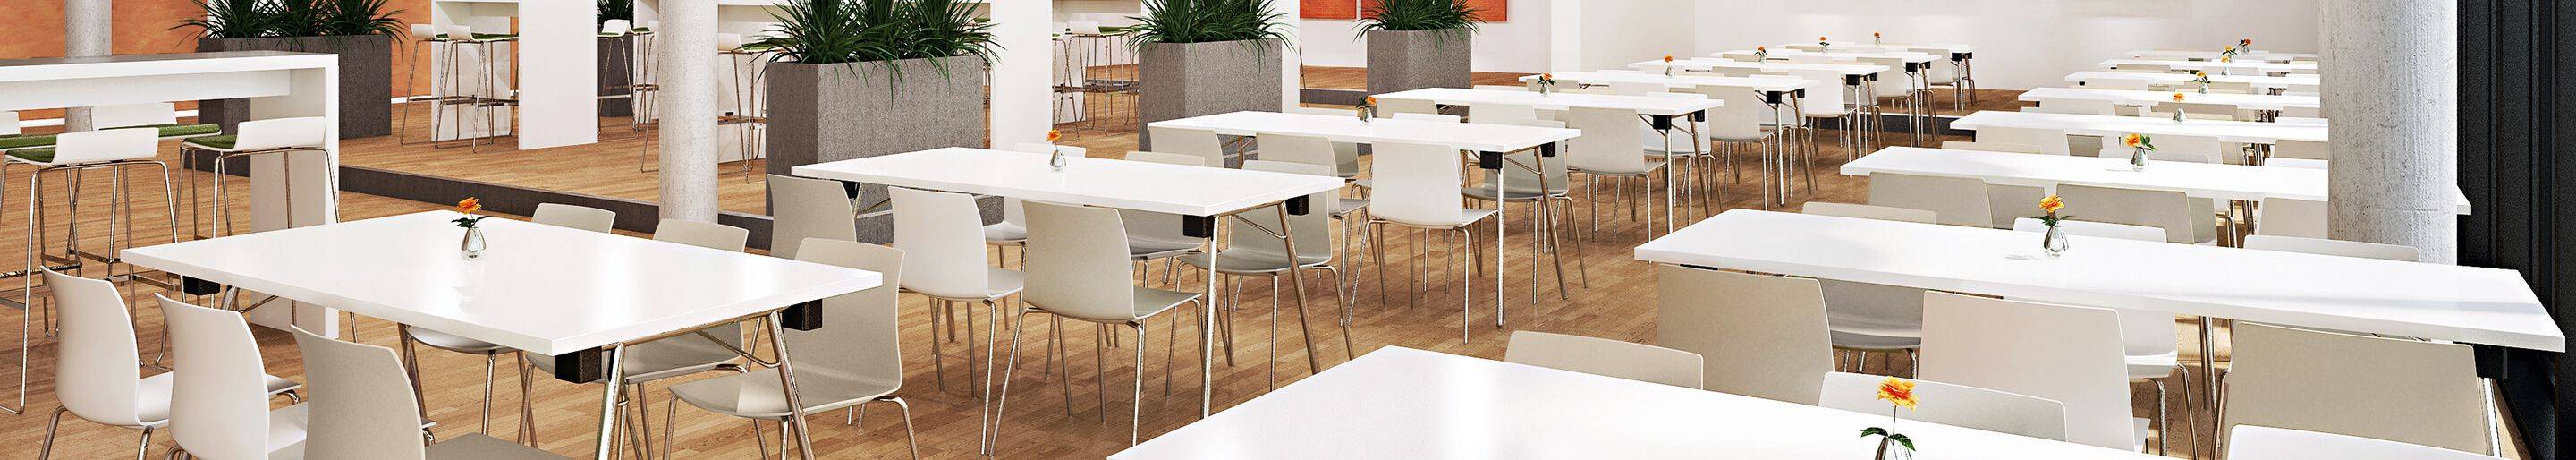 Indoor Canteen Furniture for your restaurant or hotel